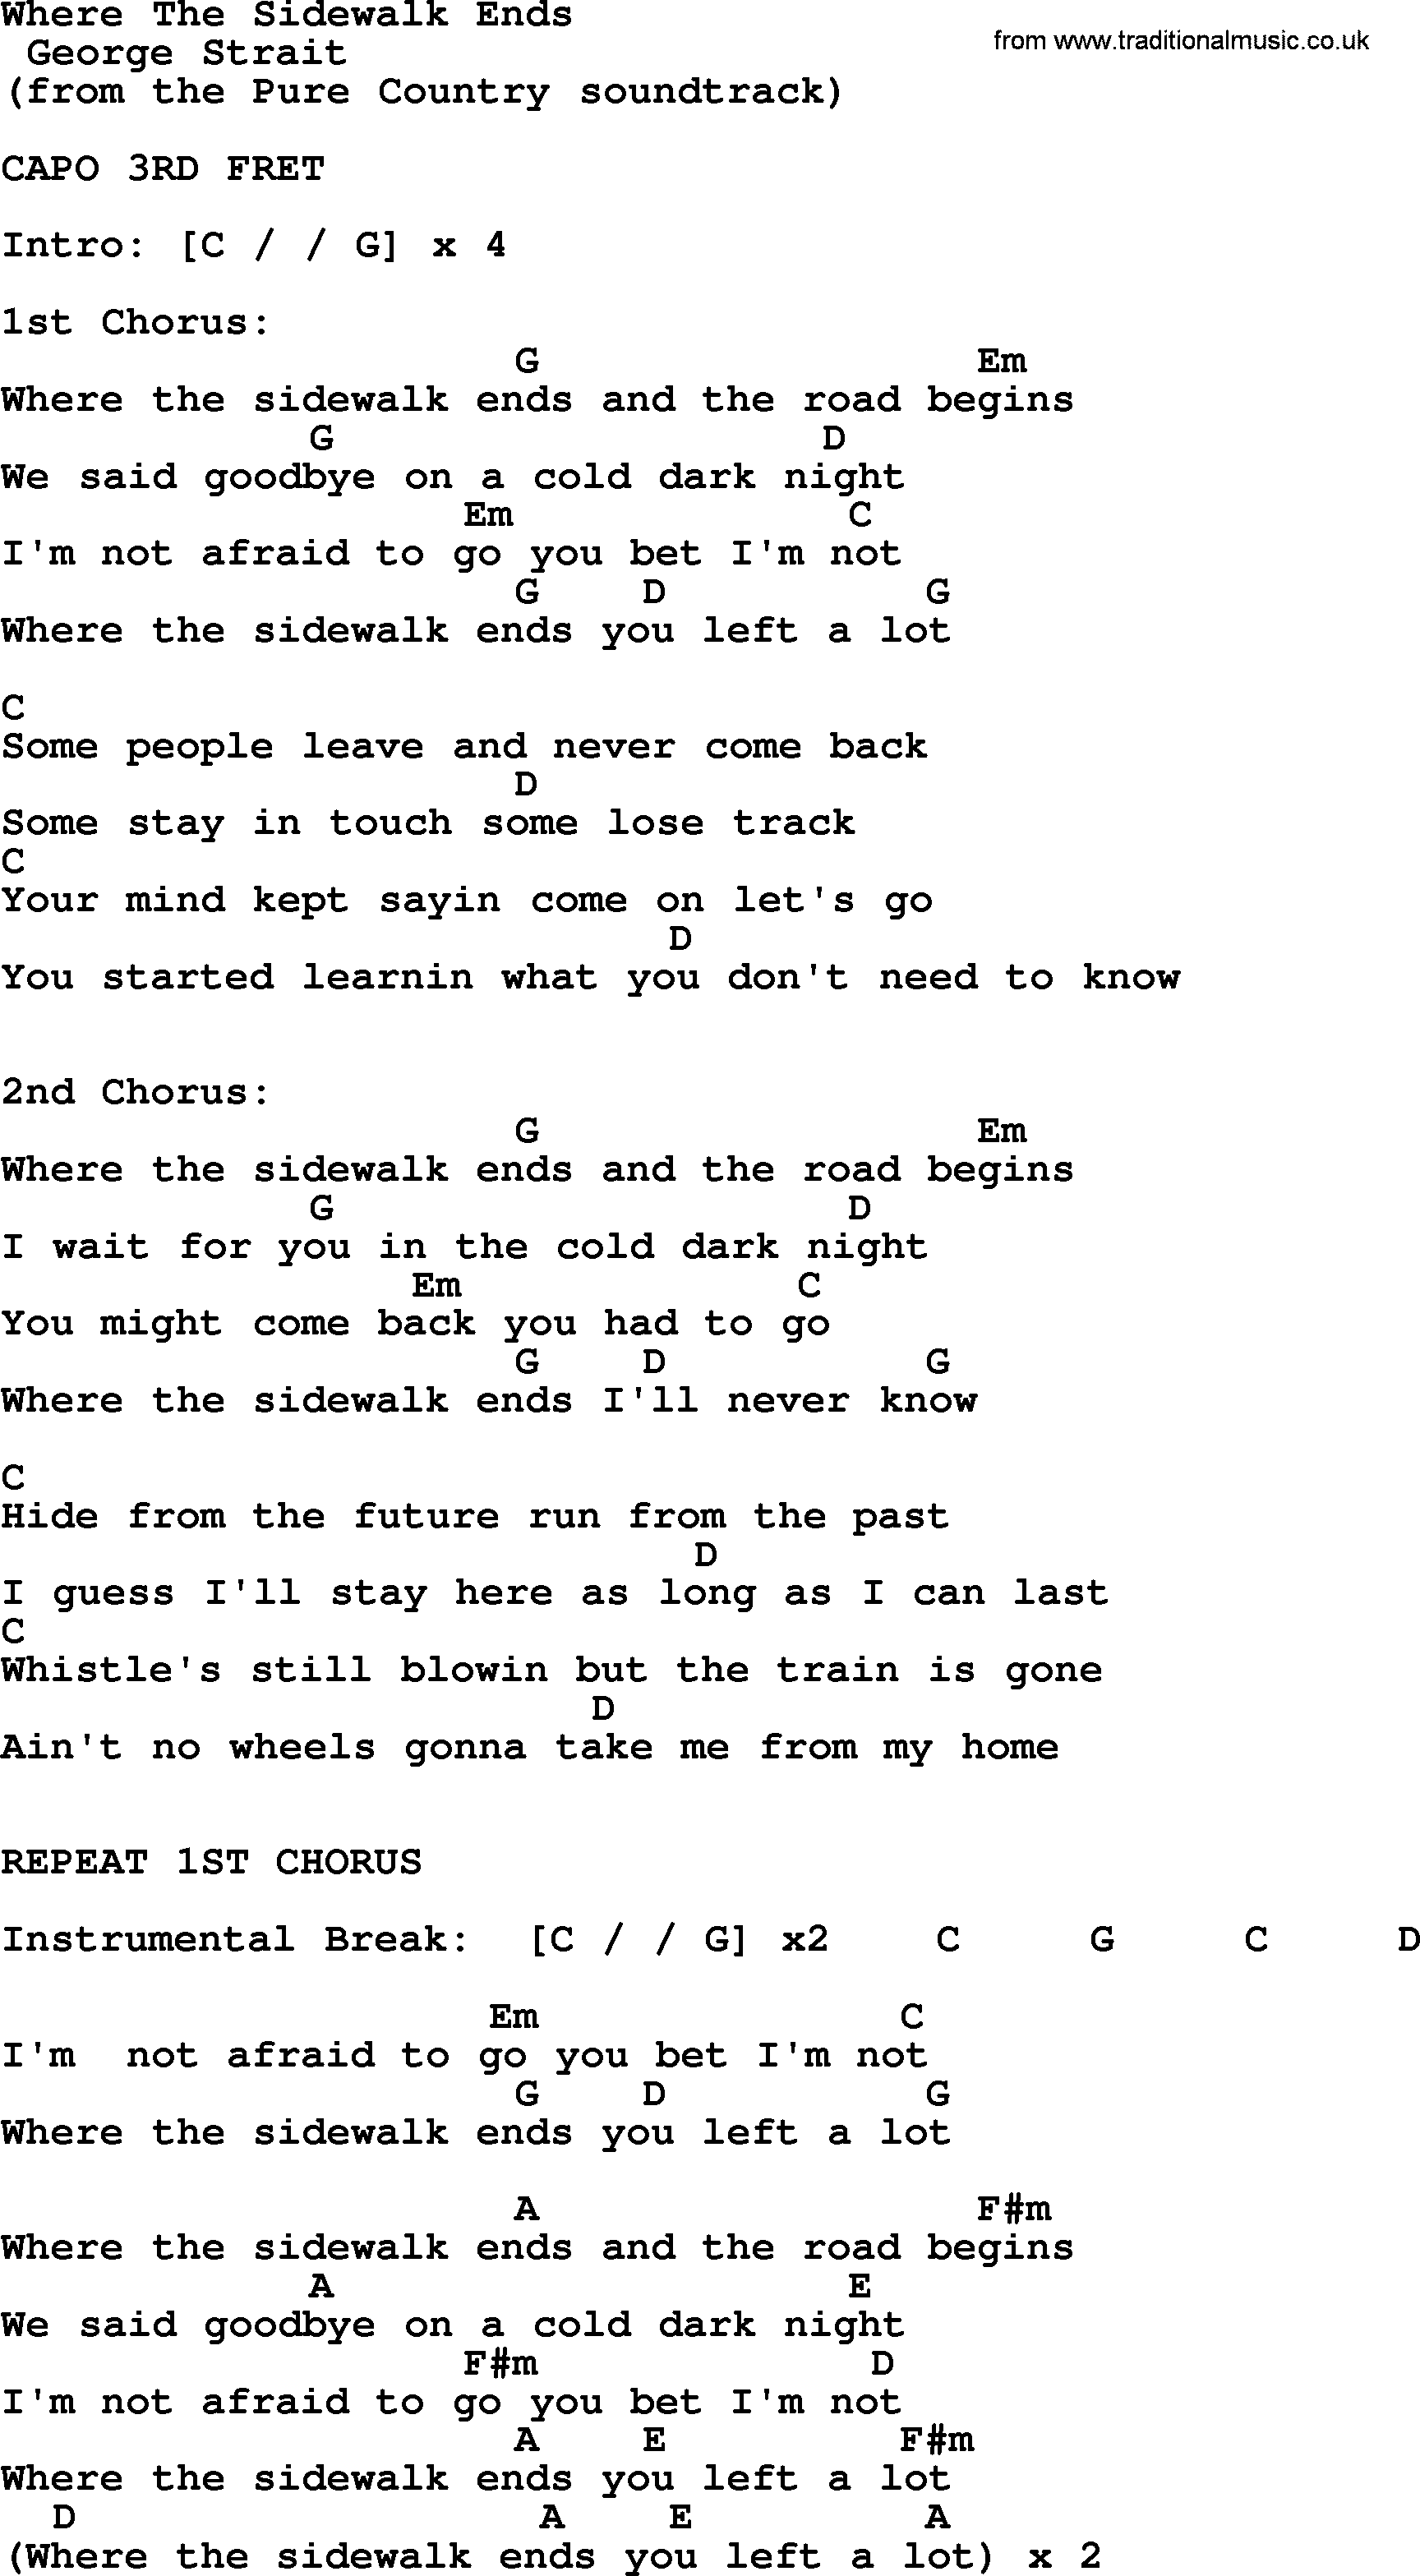 George Strait song: Where The Sidewalk Ends, lyrics and chords